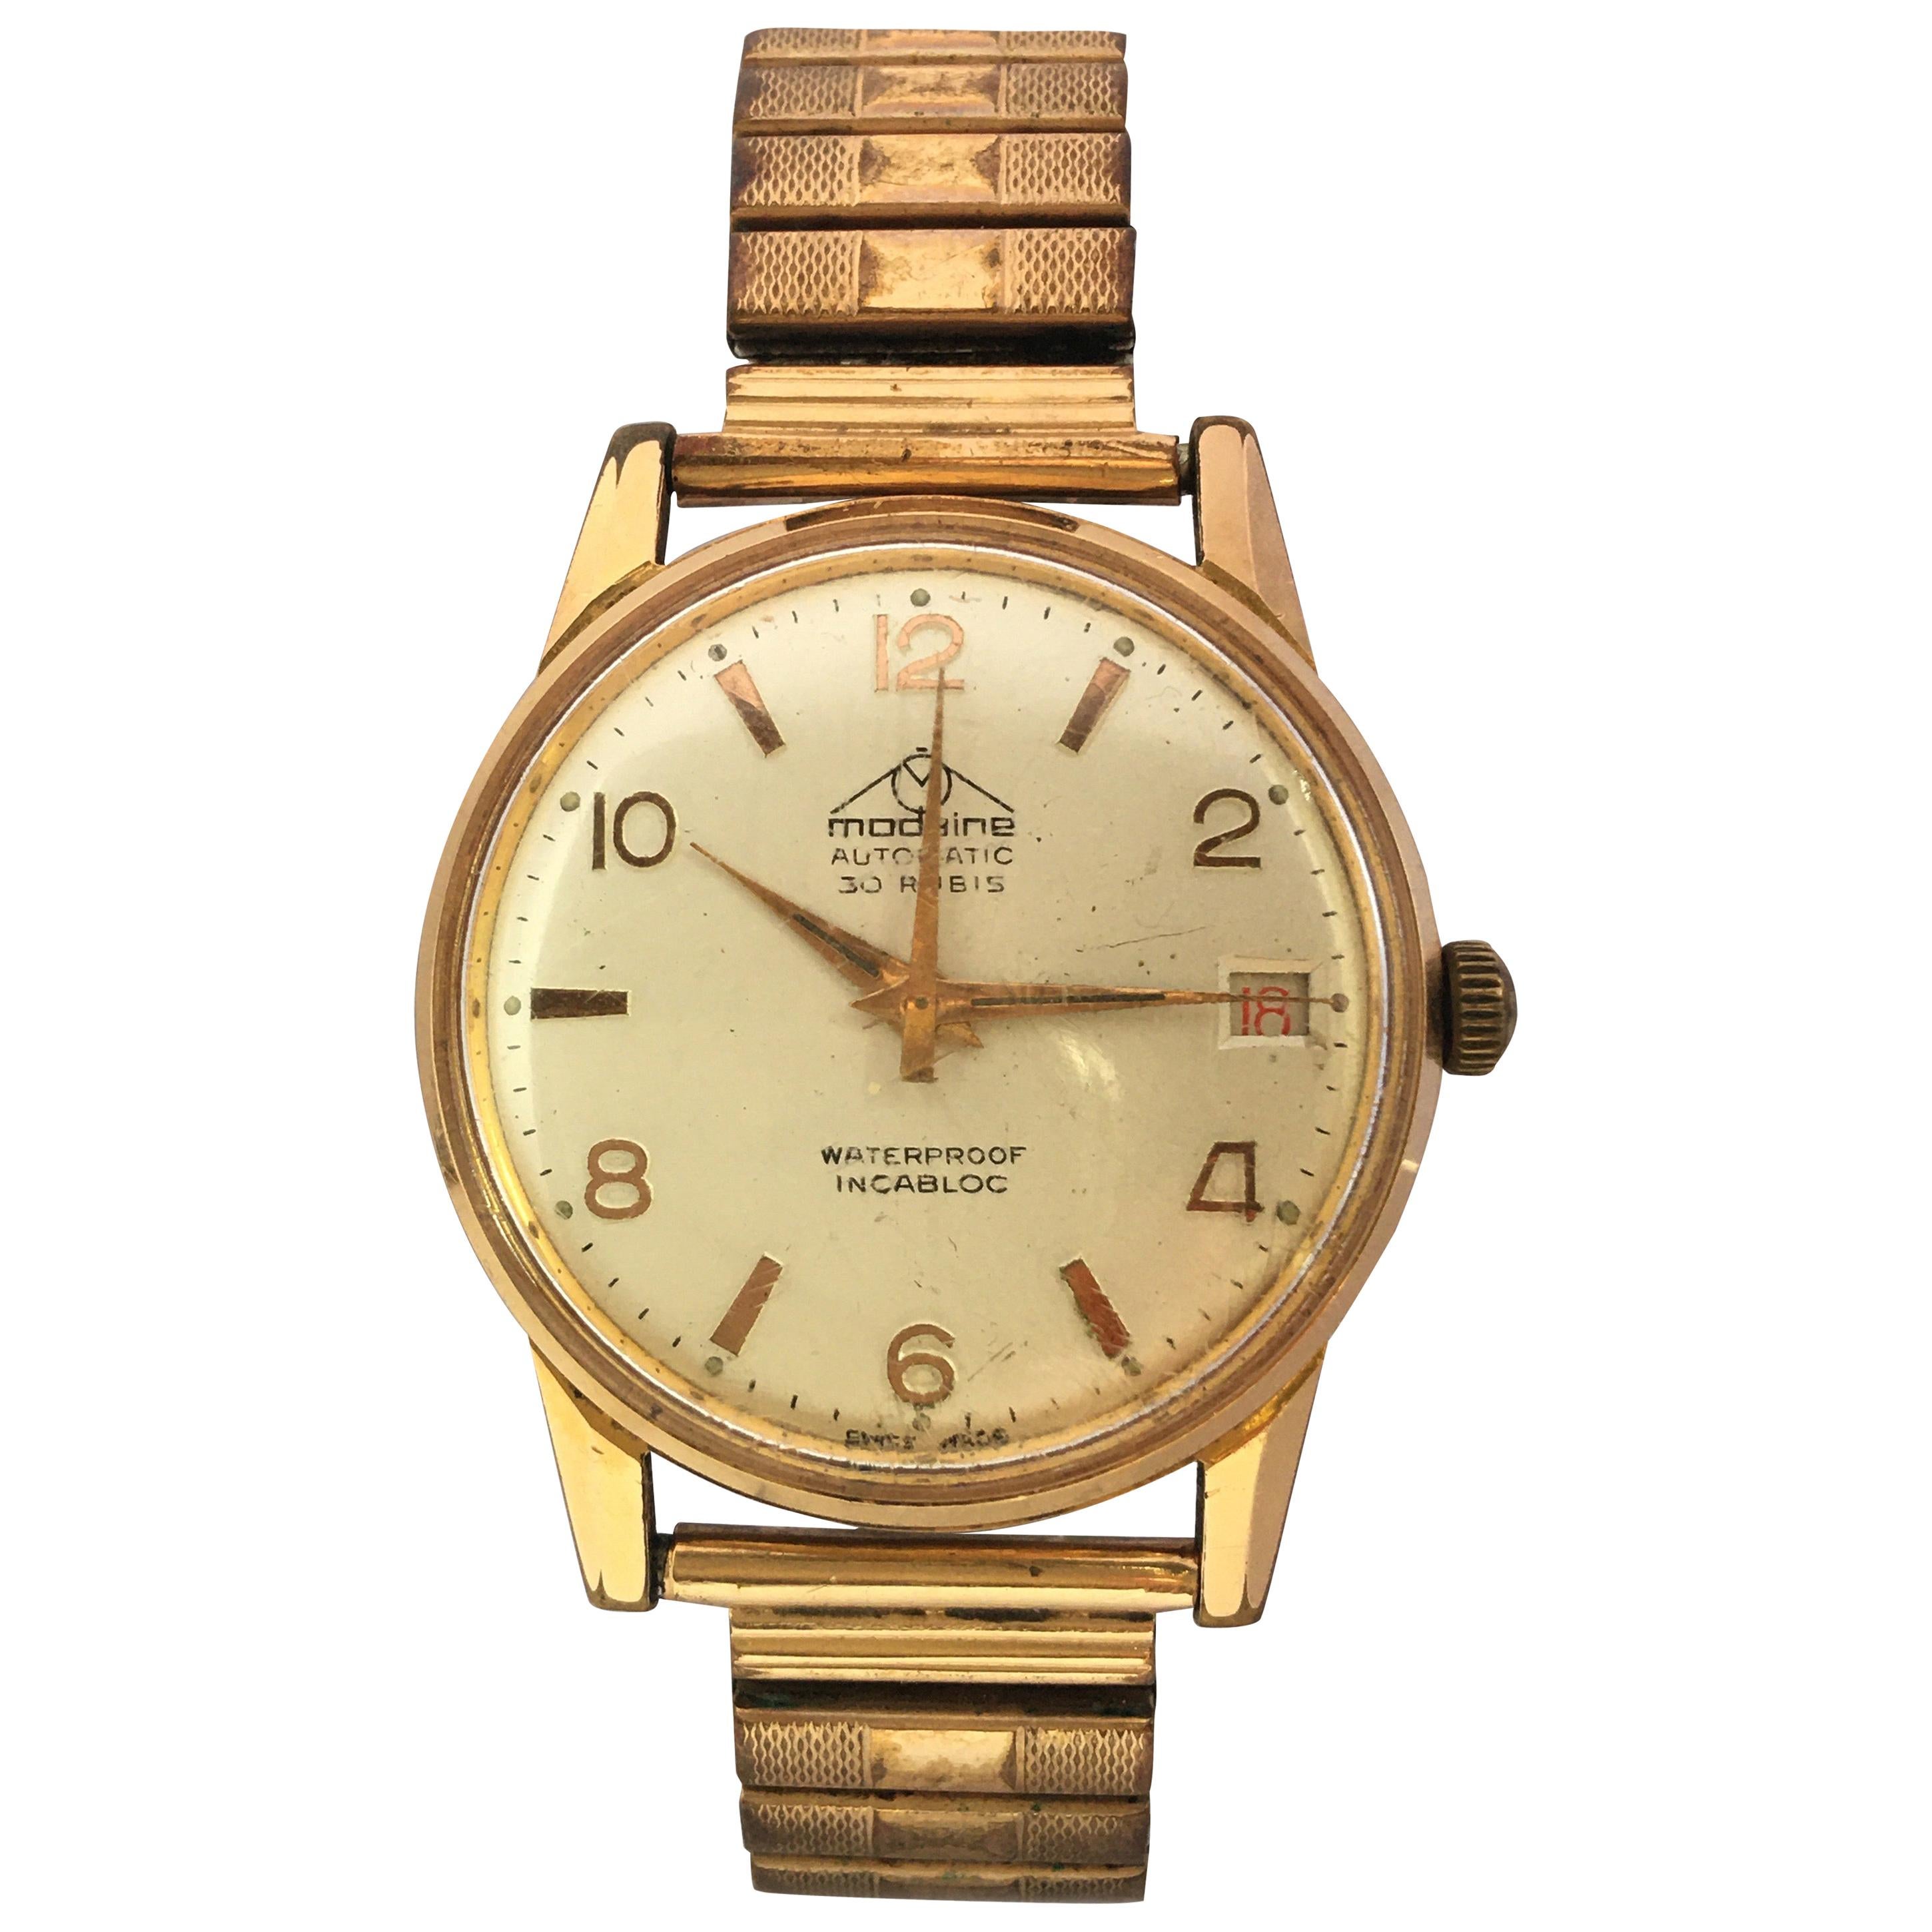 Vintage 1960s Gold-Plated and Stainless Steel 30 Rubis Swiss Automatic Watch